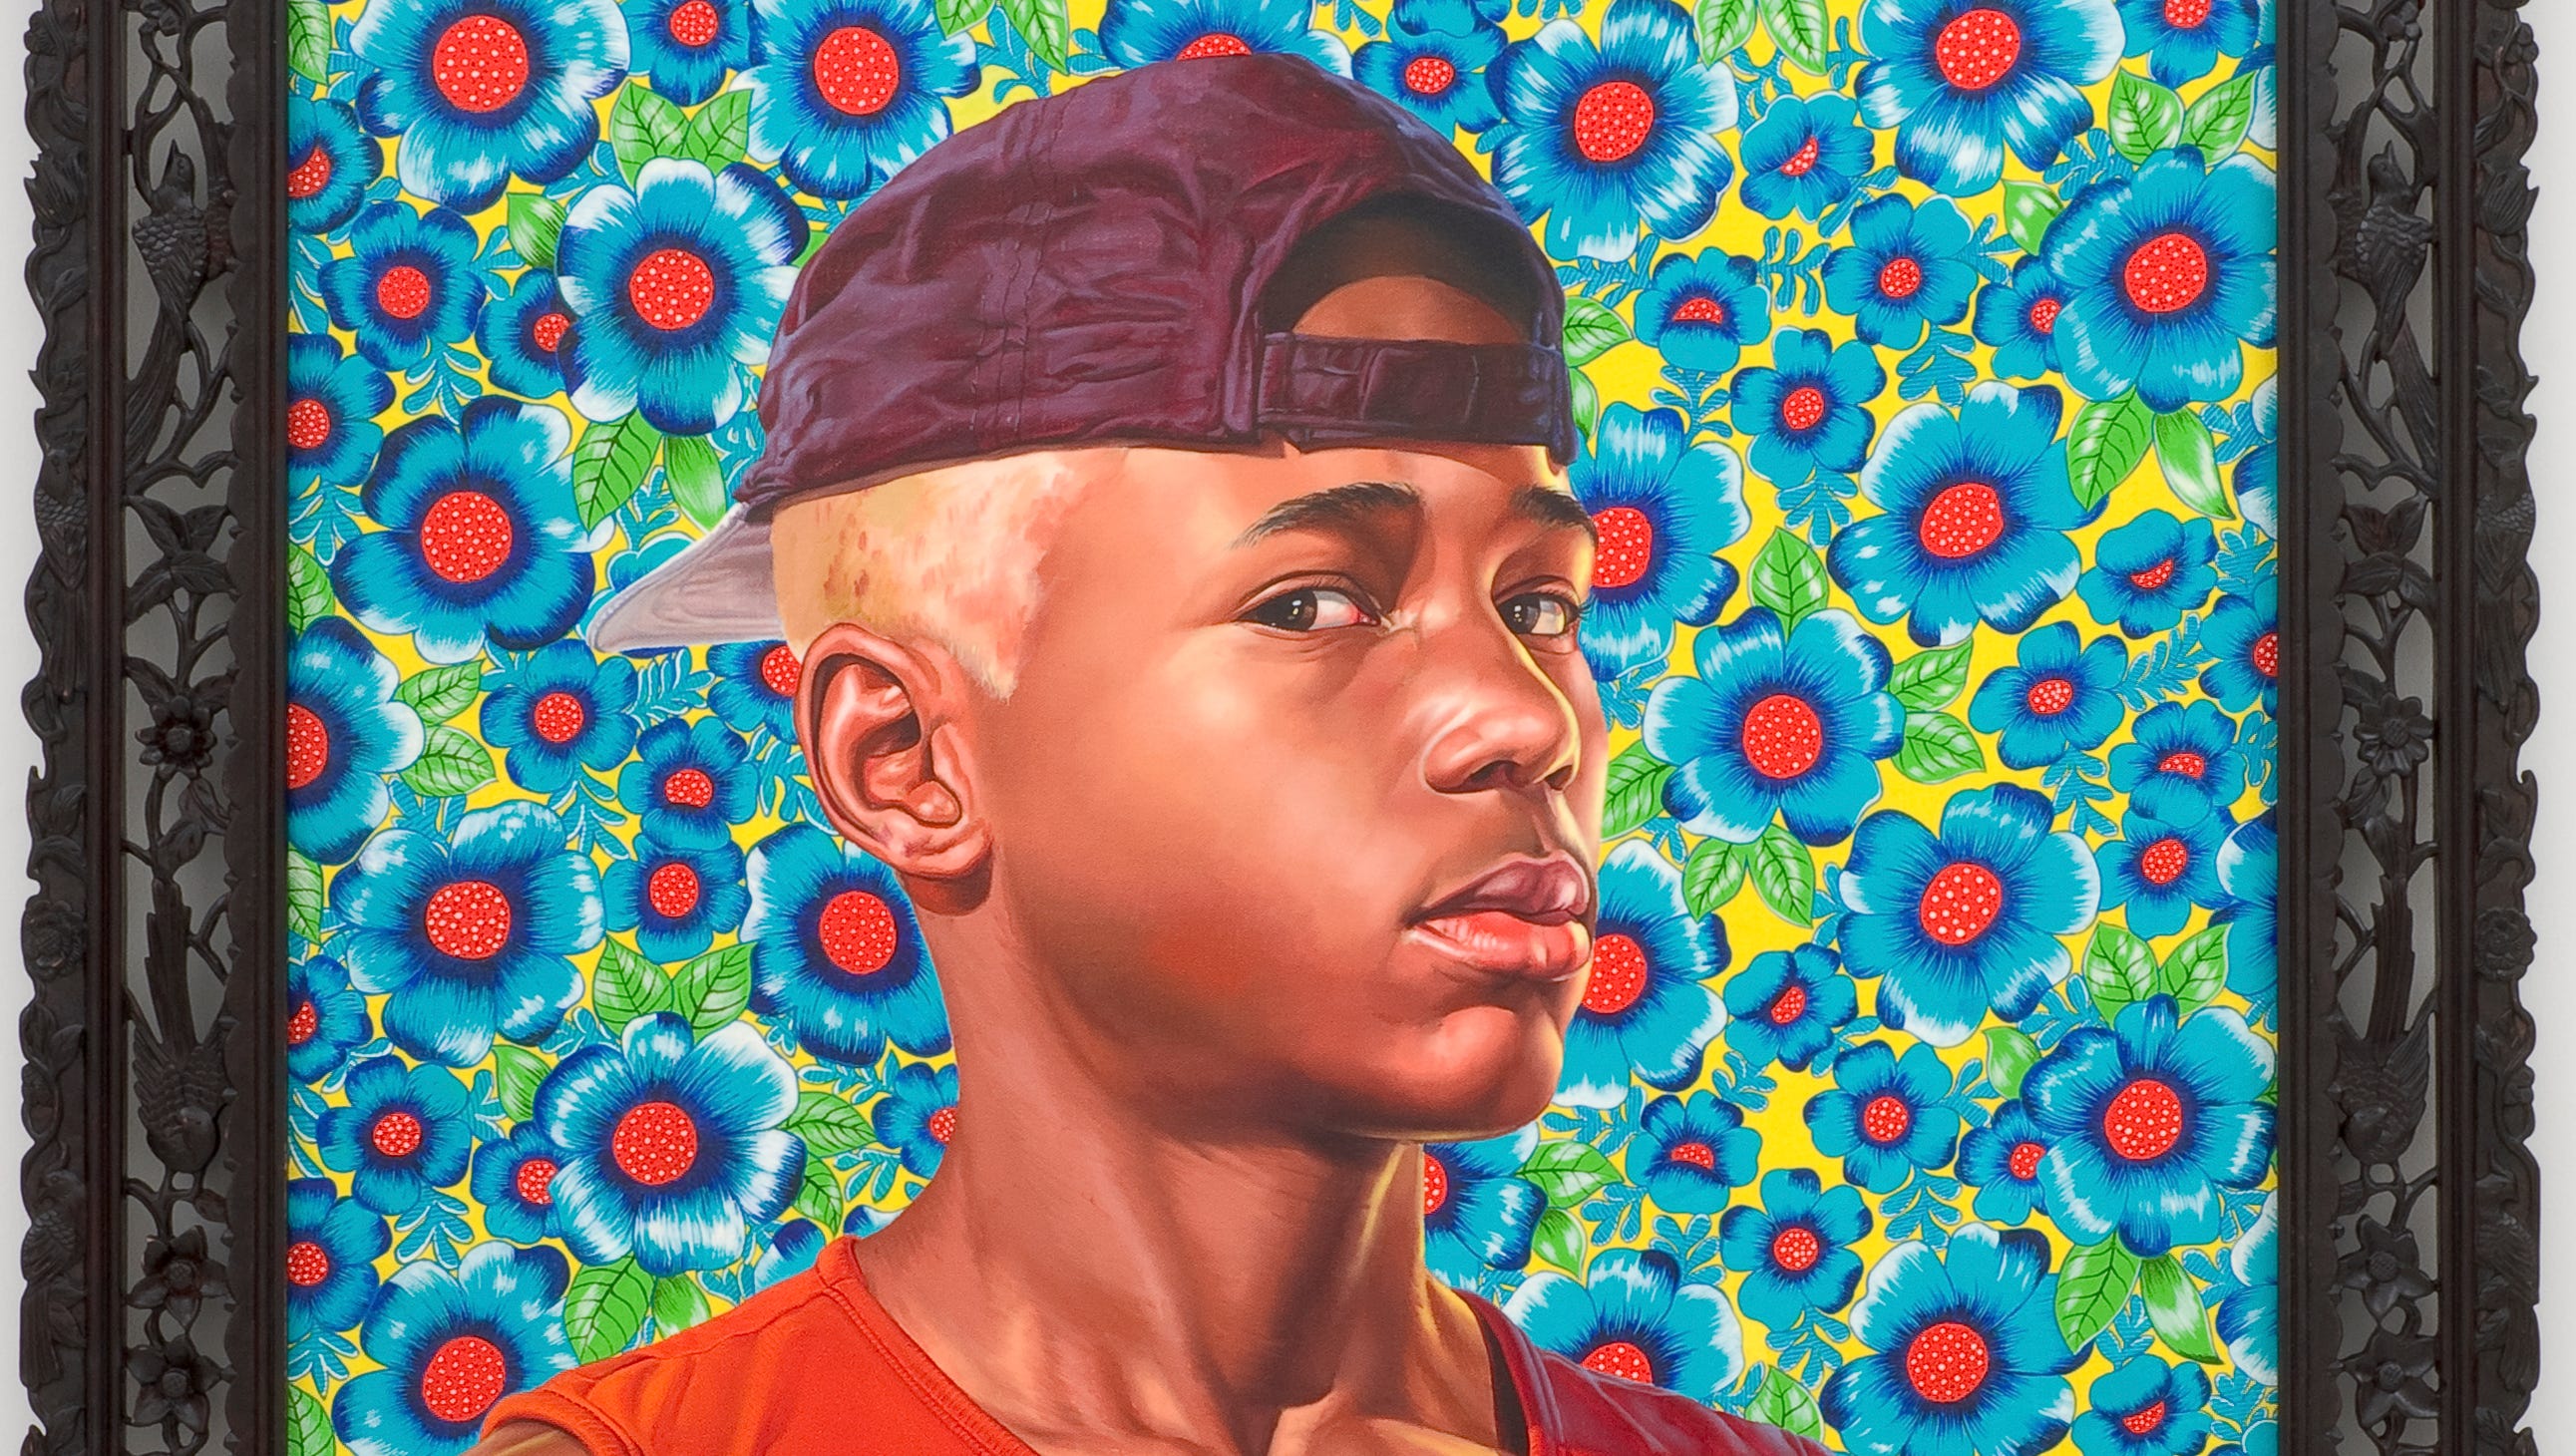 Kehinde Wiley's art brings color to the Old Masters — in more ways than one